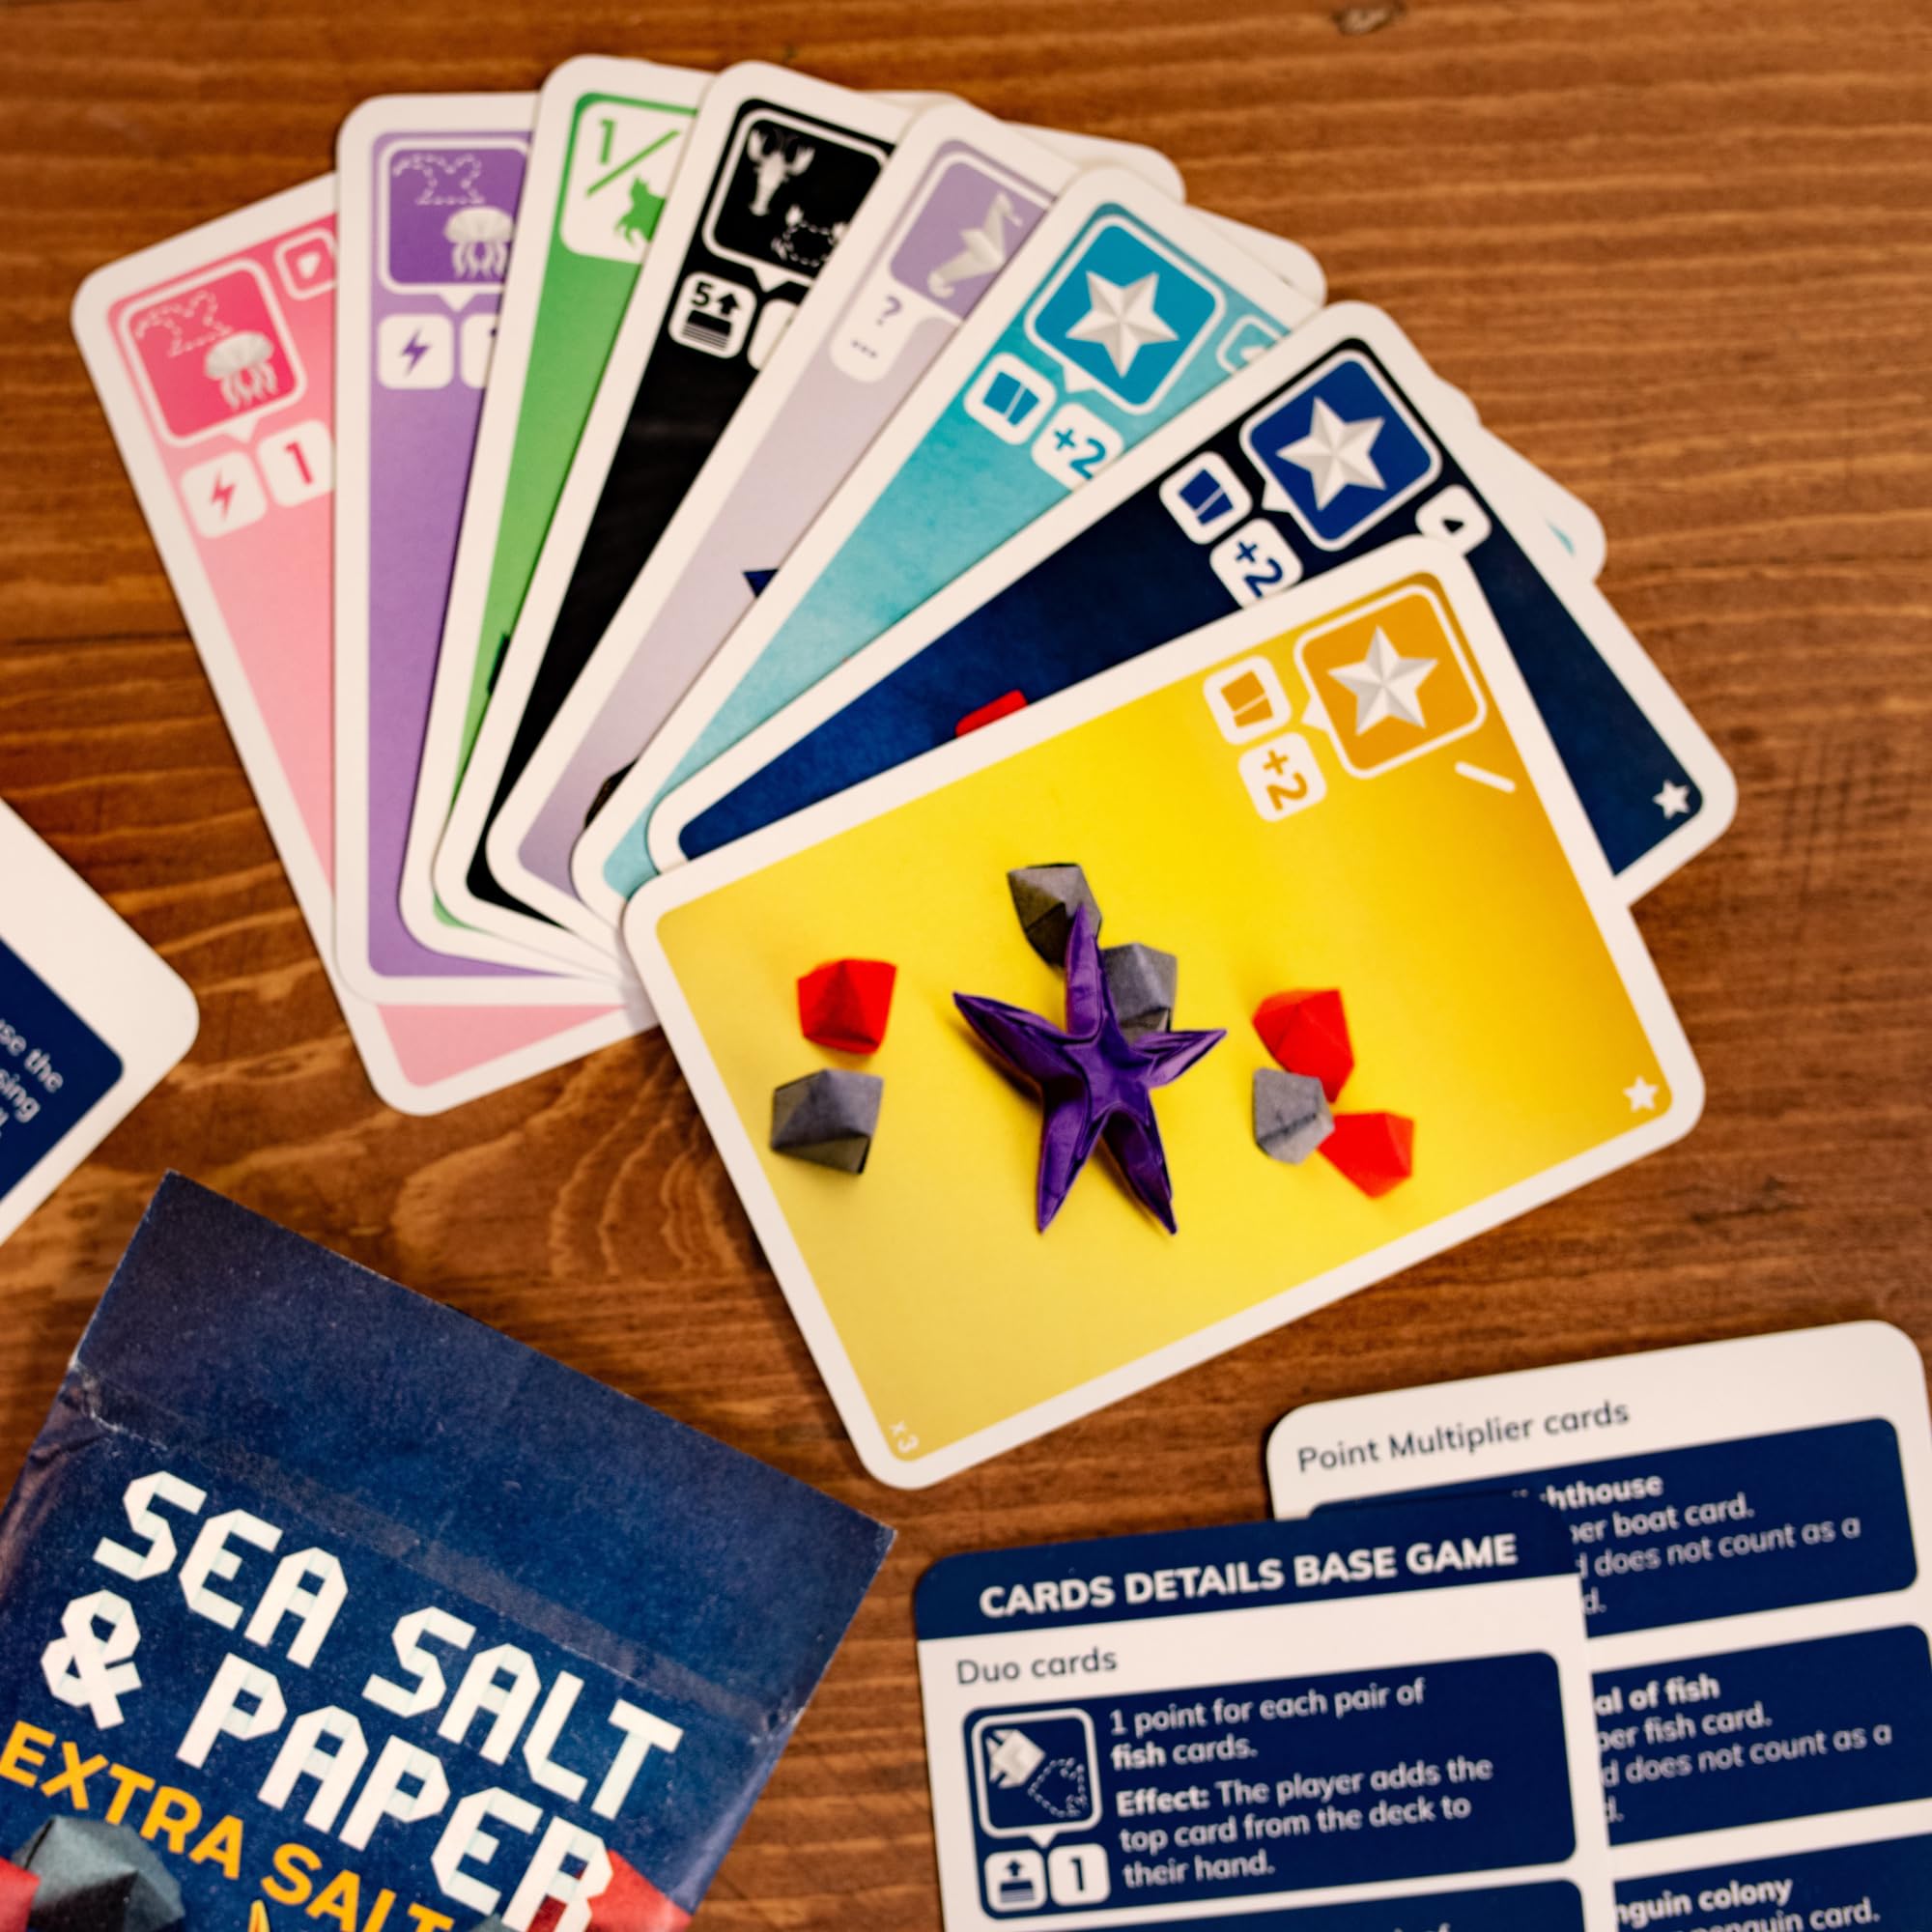 Pandasaurus Games Sea Salt and Paper Extra Salt Expansion - 8 New Cards with Exciting Effects! Fast-Paced Strategy Game for Kids & Adults, Ages 8+, 2-4 Players, 30-45 Minute Playtime, Made